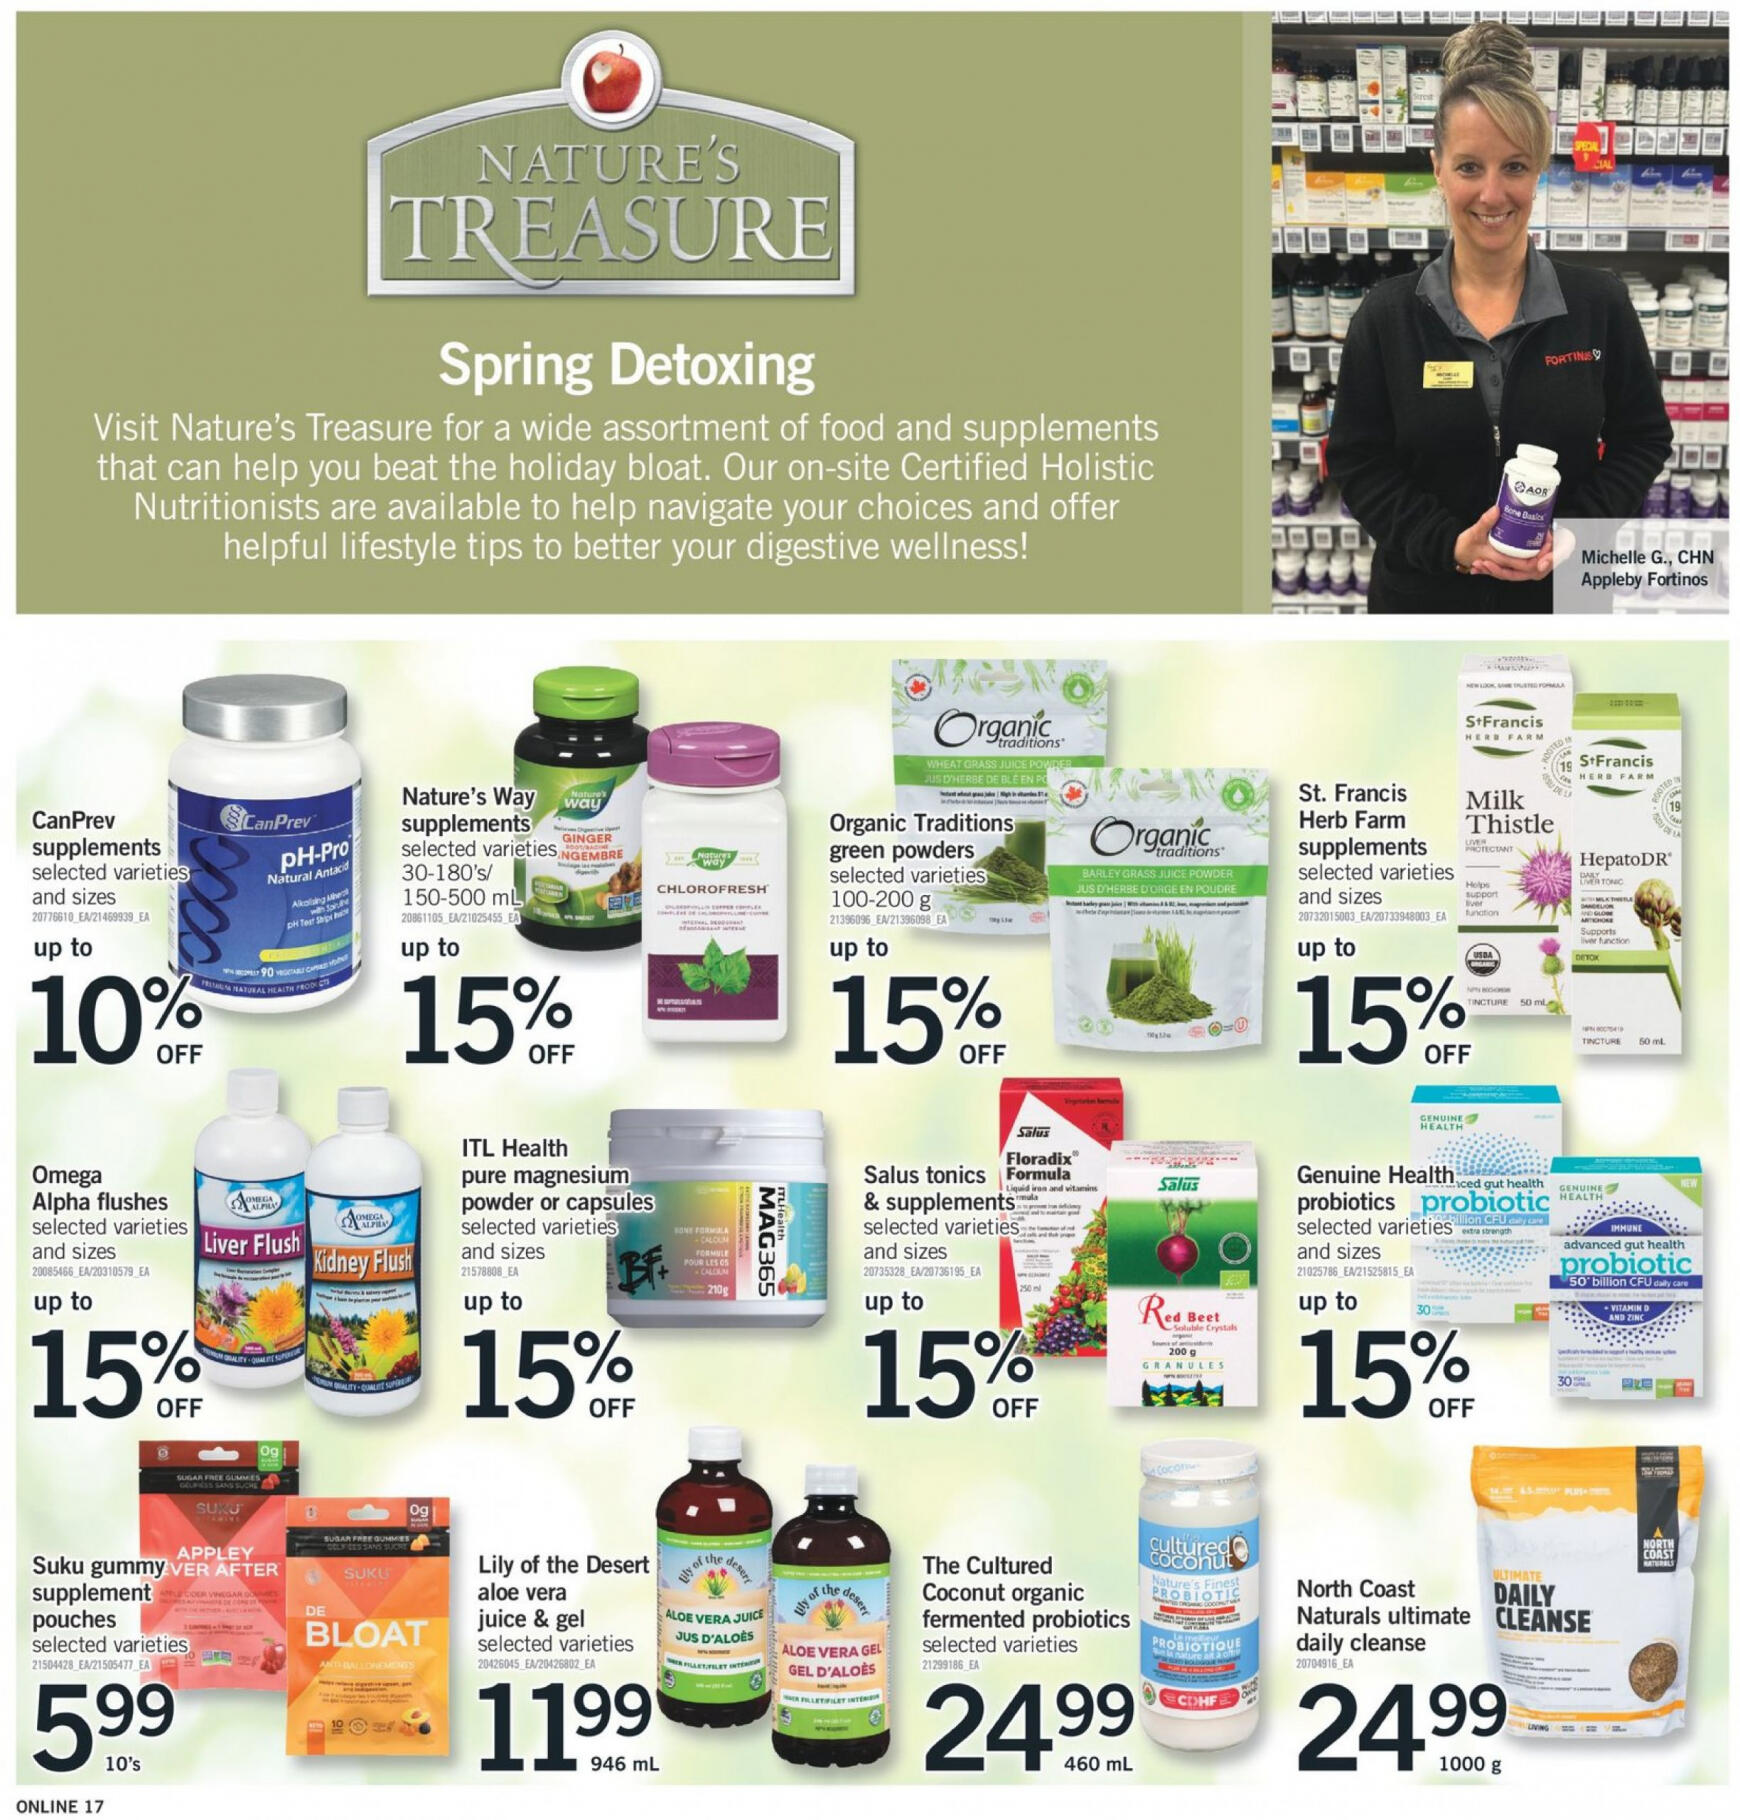 fortinos - Fortinos flyer current 04.04. - 10.04. - page: 16